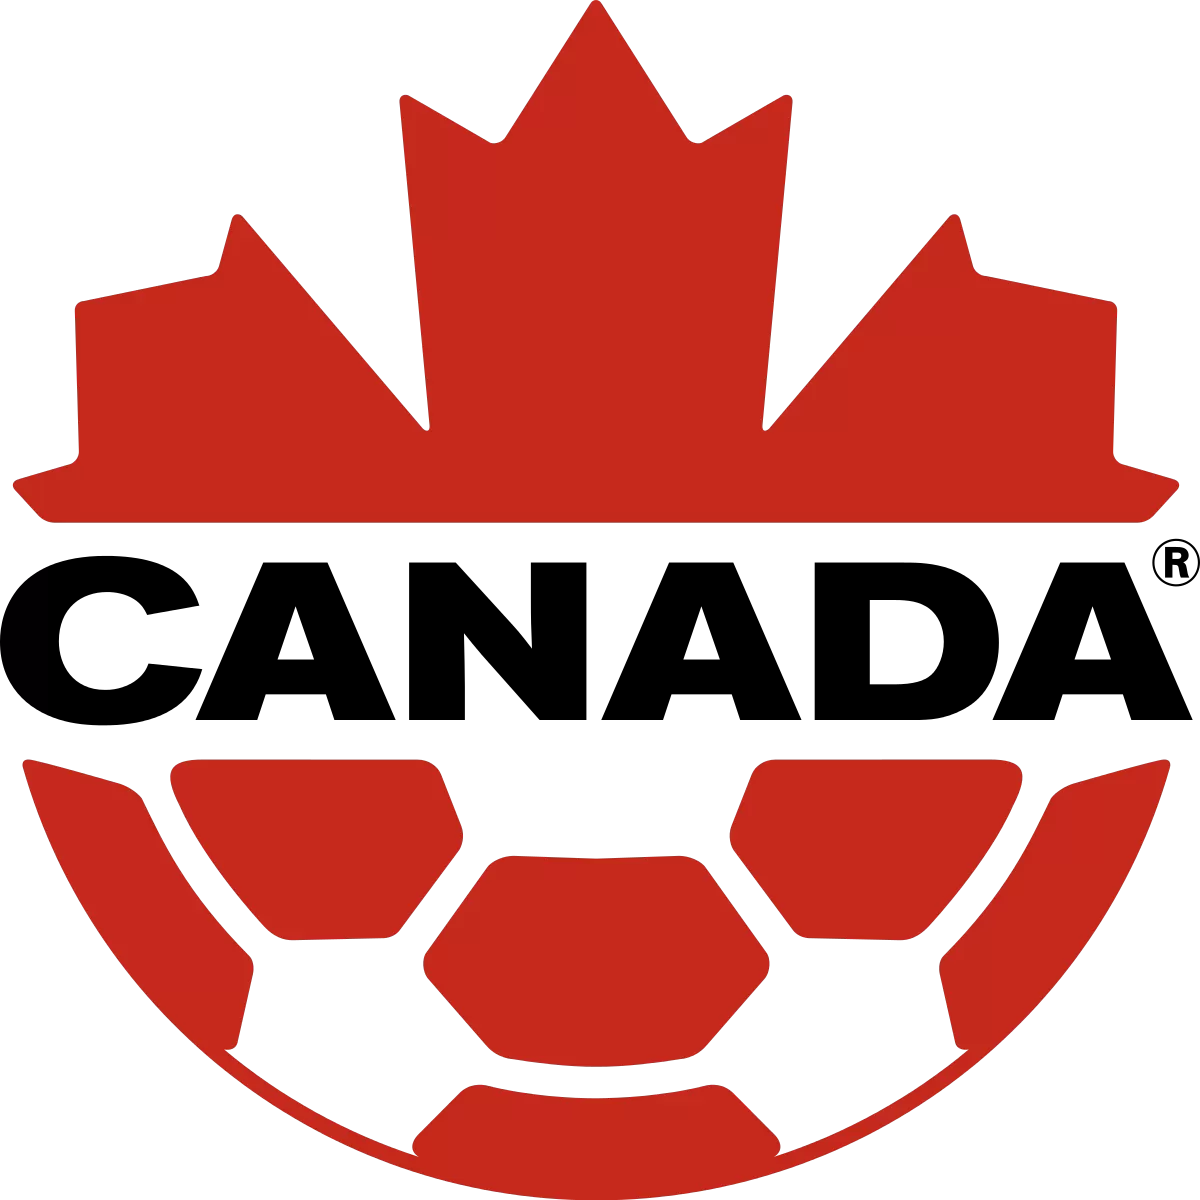 Canada - Best Soccer Players